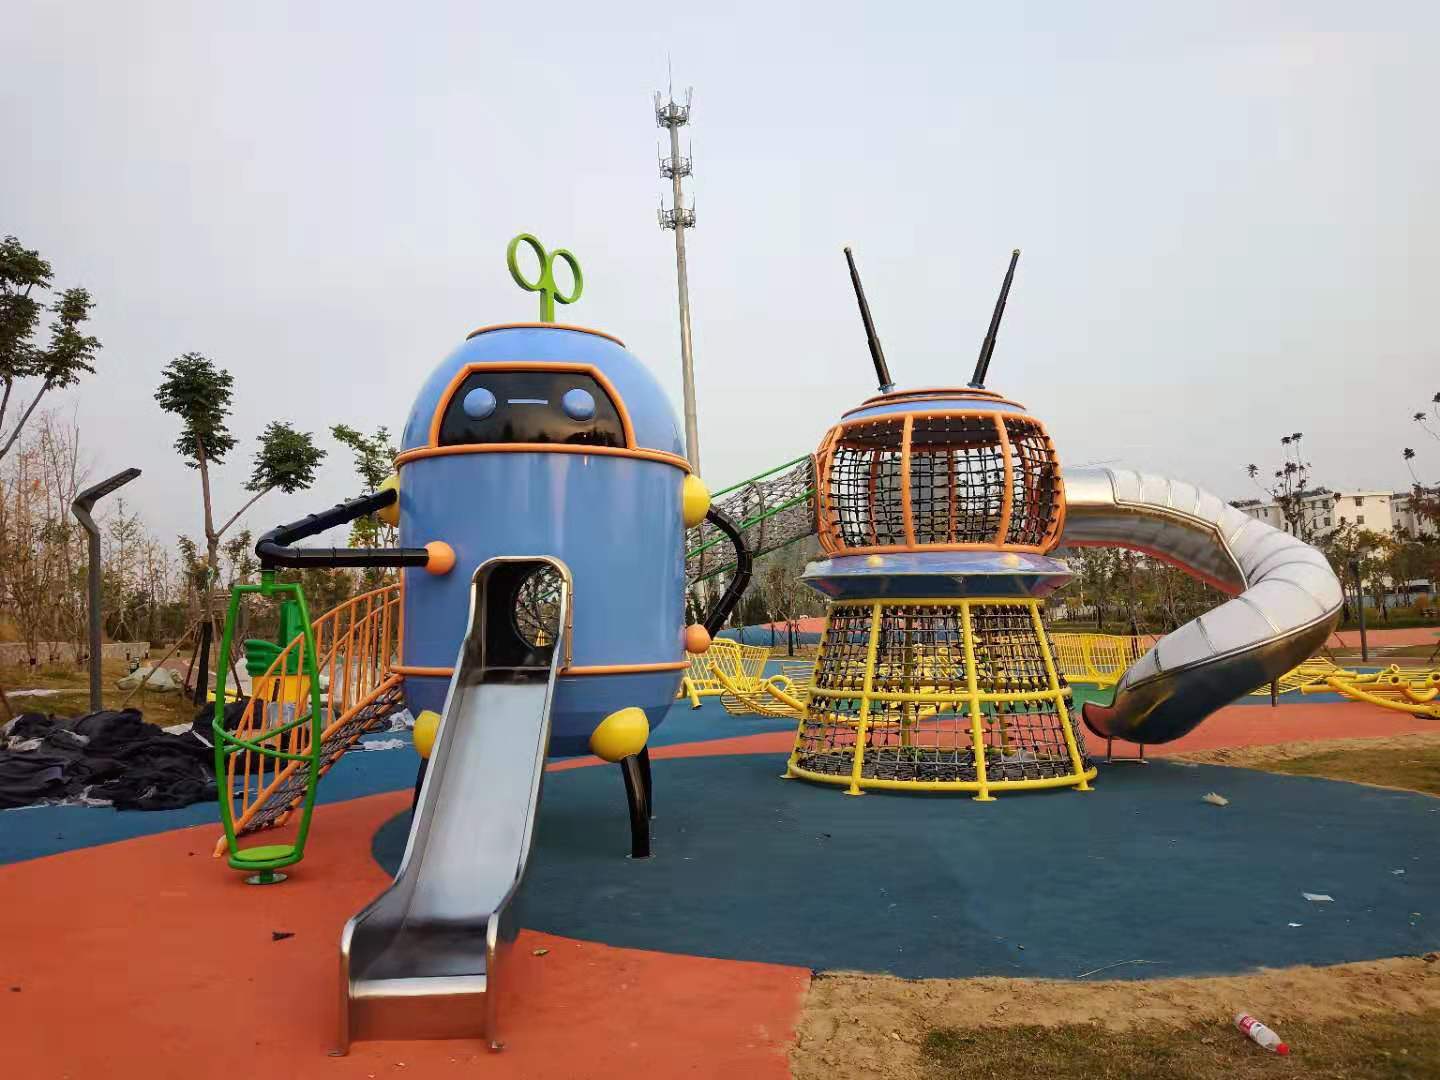 Stainless steel slides creat safety and happiness in kids’ playground (1)